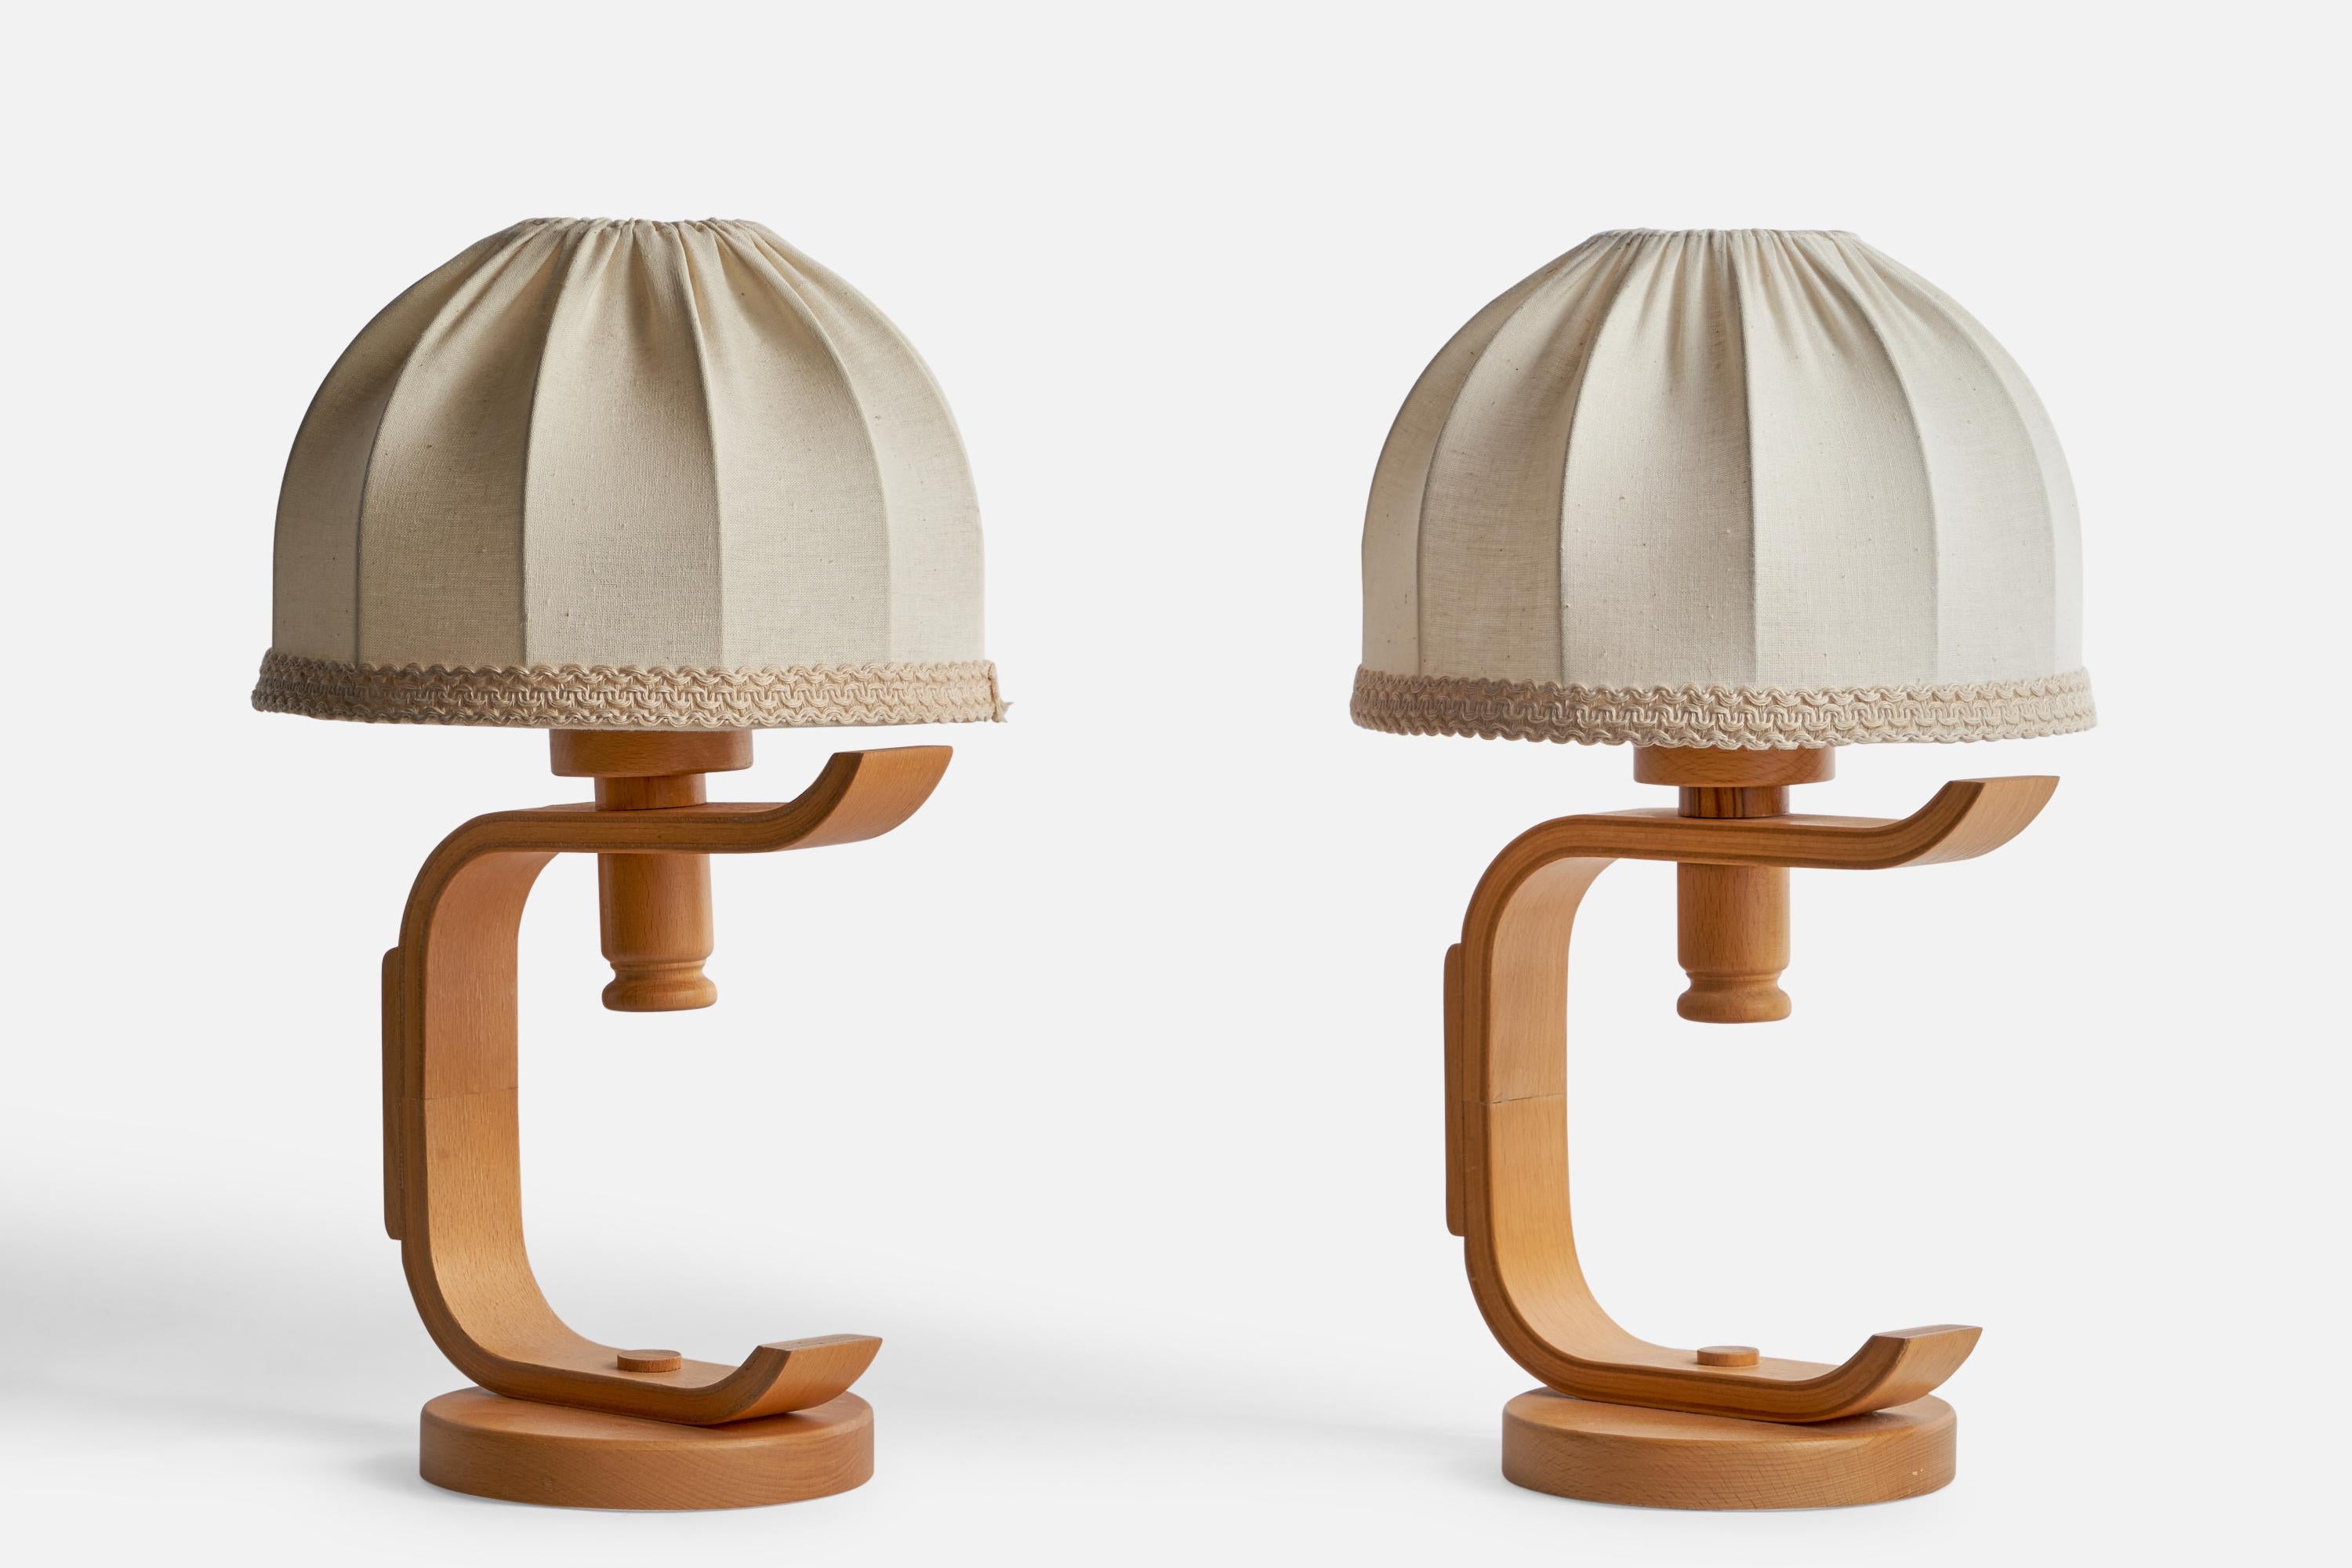 A pair of oak and off-white fabric table lamps designed and produced in Sweden, 1970s.

Overall Dimensions (inches): 15” H x 9” Diameter
Bulb Specifications: E-26 Bulbs
Number of Sockets: 2
All lighting will be converted for US usage. We is unable